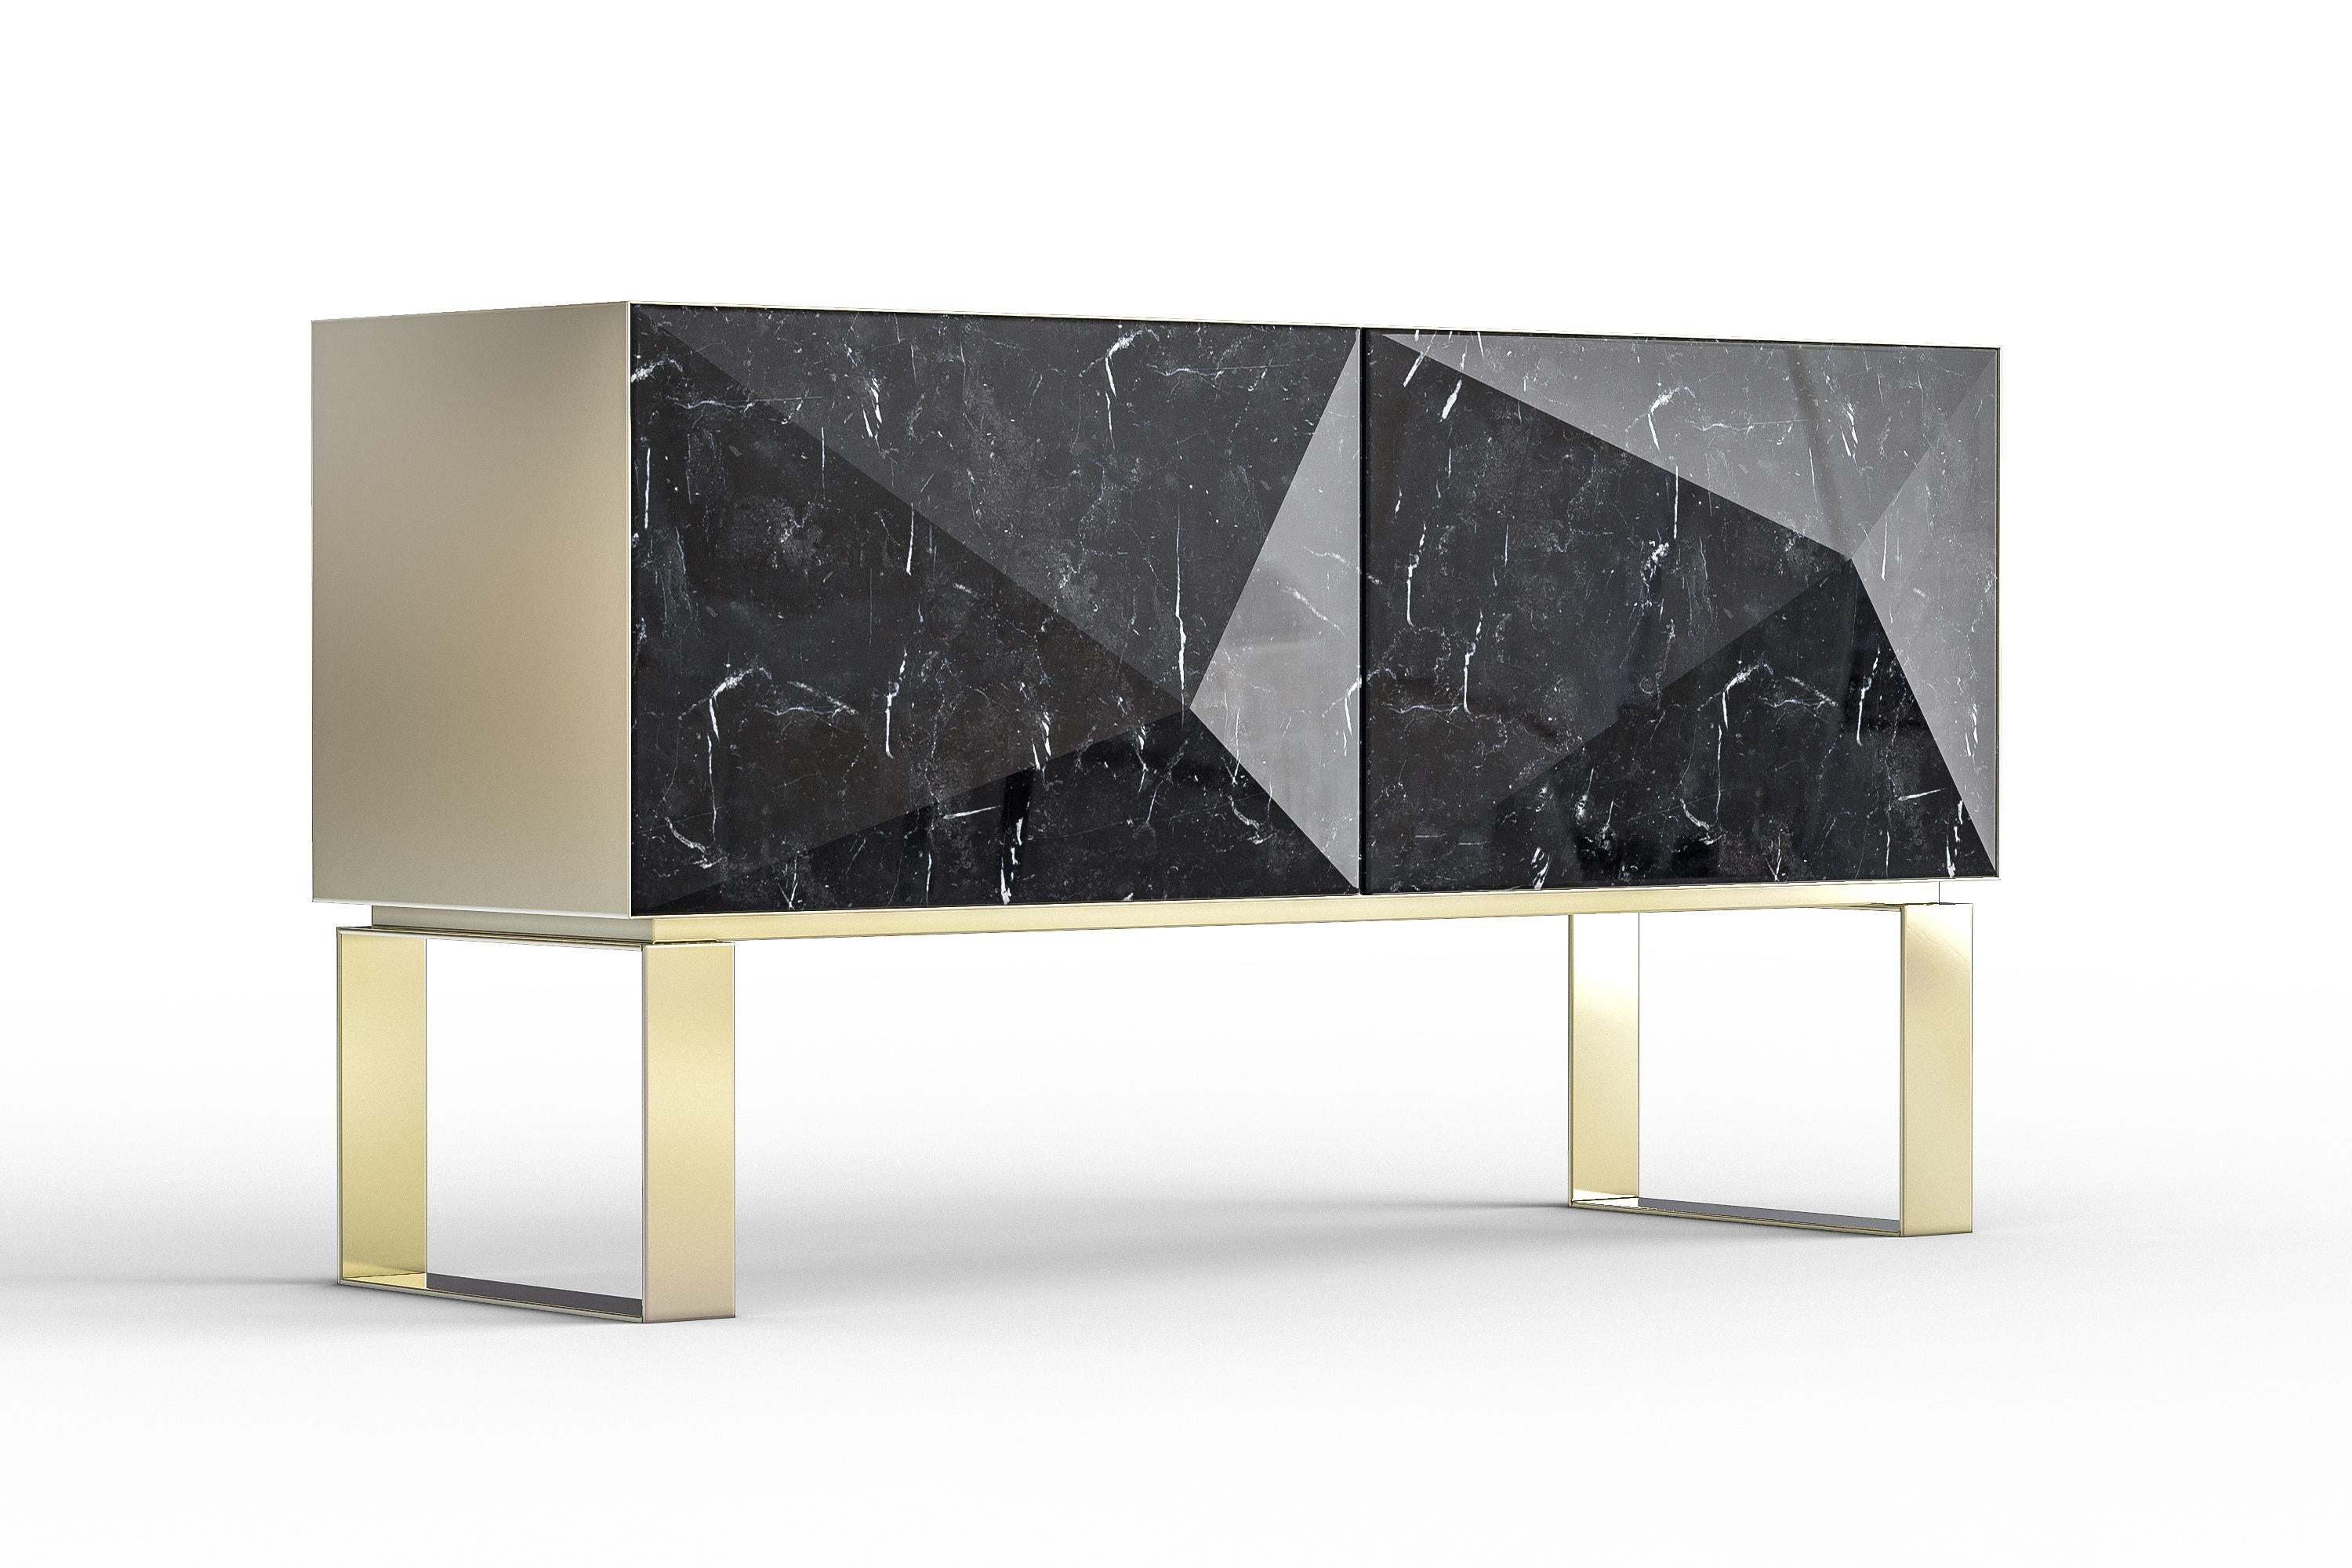 Punta cabinet by Marmi Serafini.
Materials: Marble and brass
Dimensions: D 47 x W 140 x H 76 cm

Sharp but at the same time delicate marble cuts make the punta cabinet a refined and elegant piece of furniture that is embellished with a frame and a